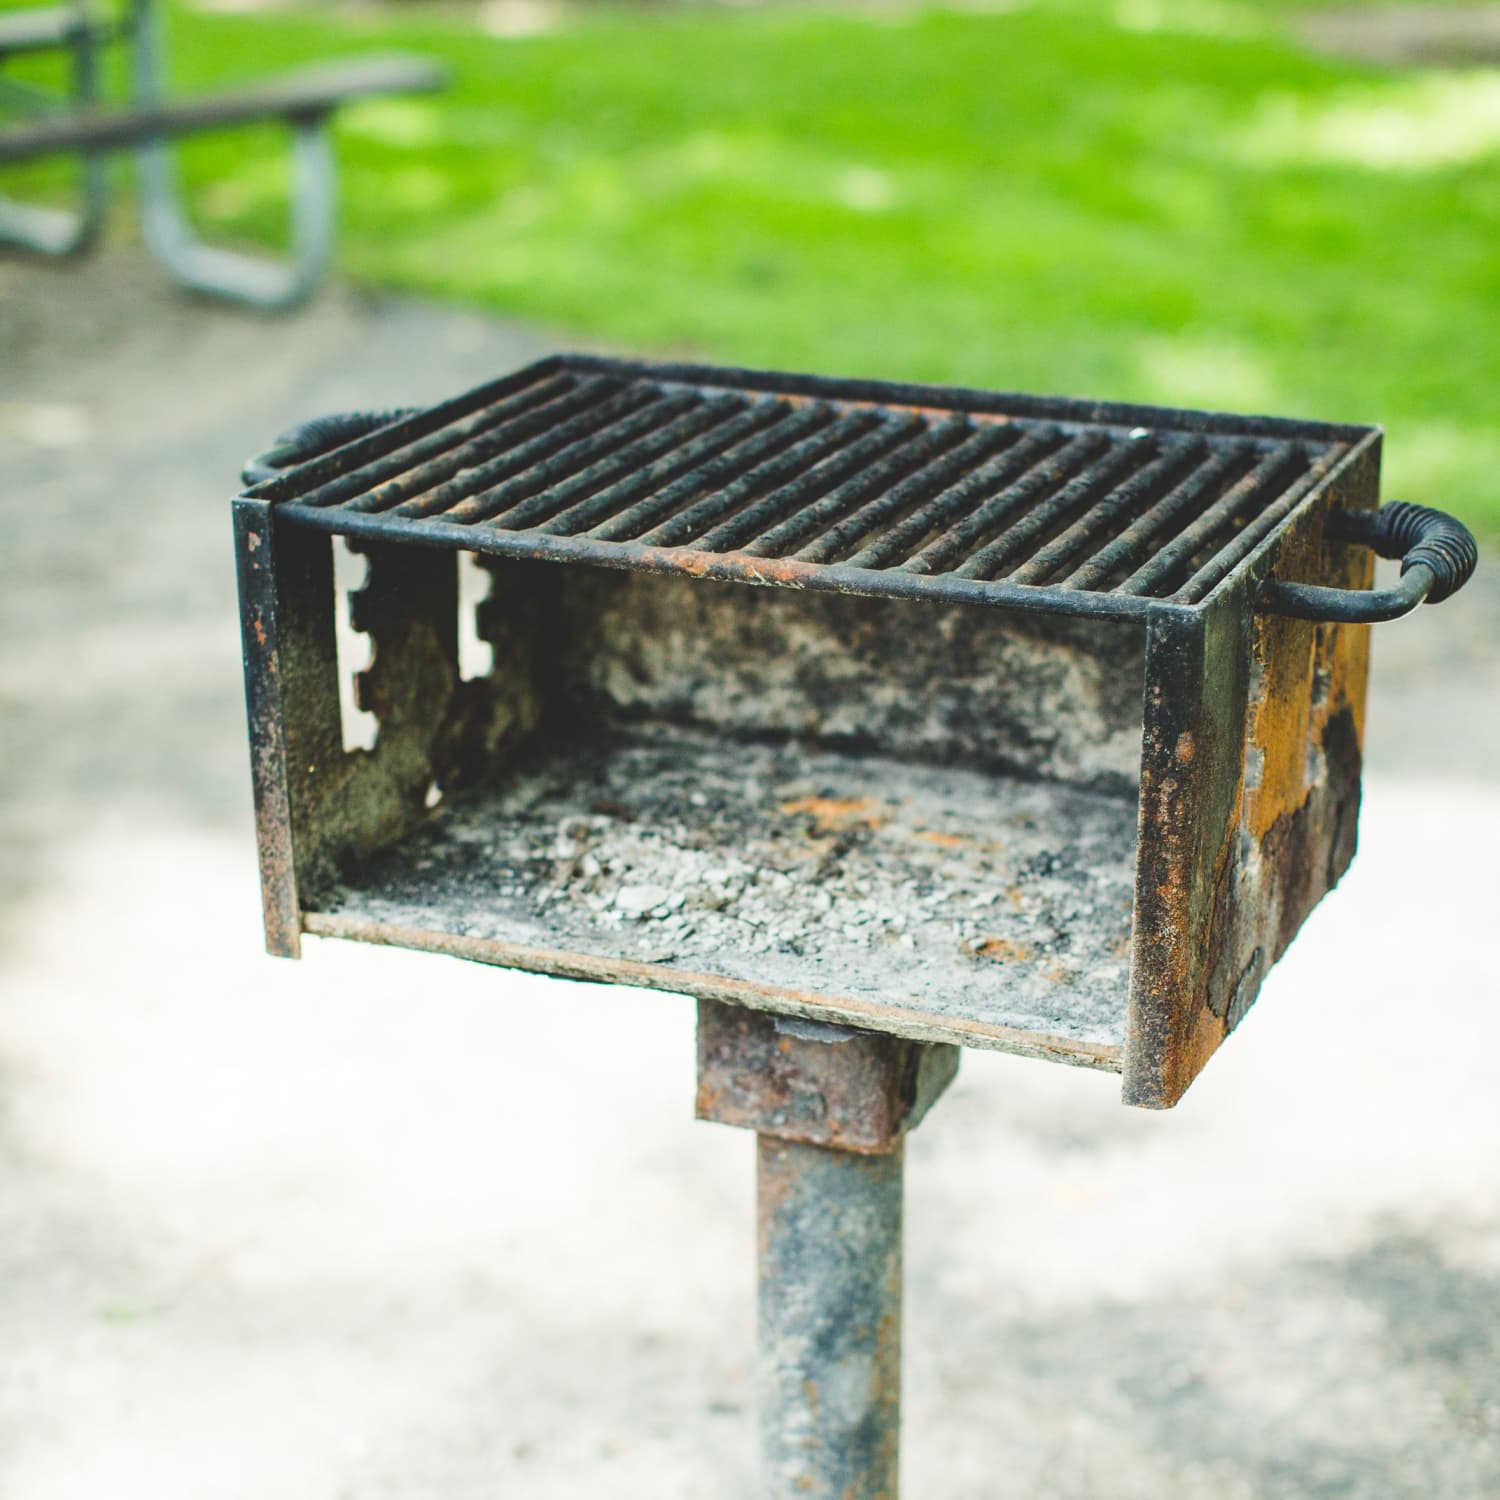 How To Clean a Charcoal Grill  Kitchn